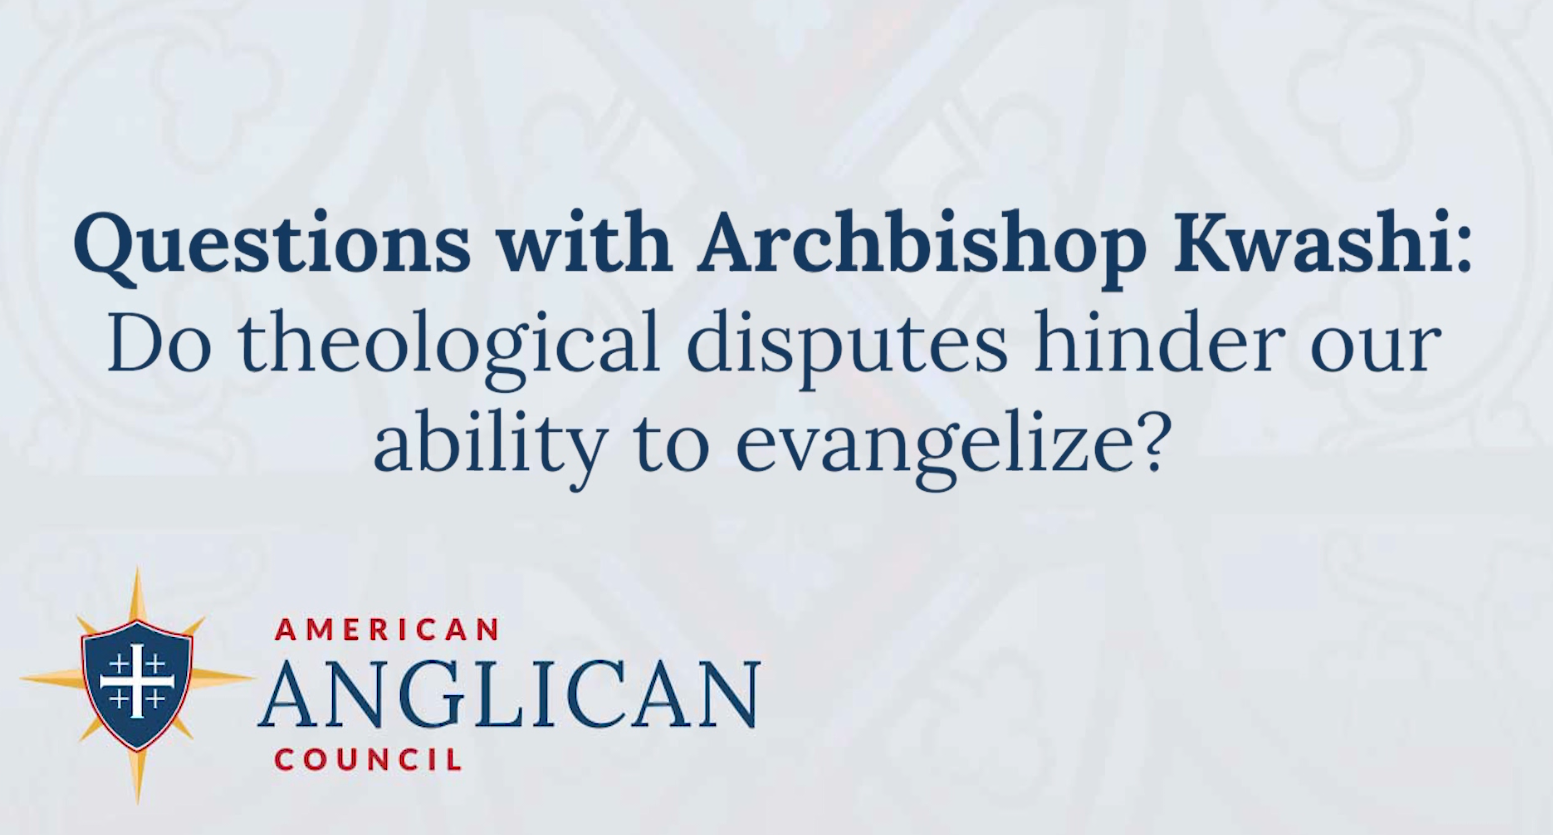 Questions with Archbishop Kwashi: Do theological disputes hinder our ability to evangelize?